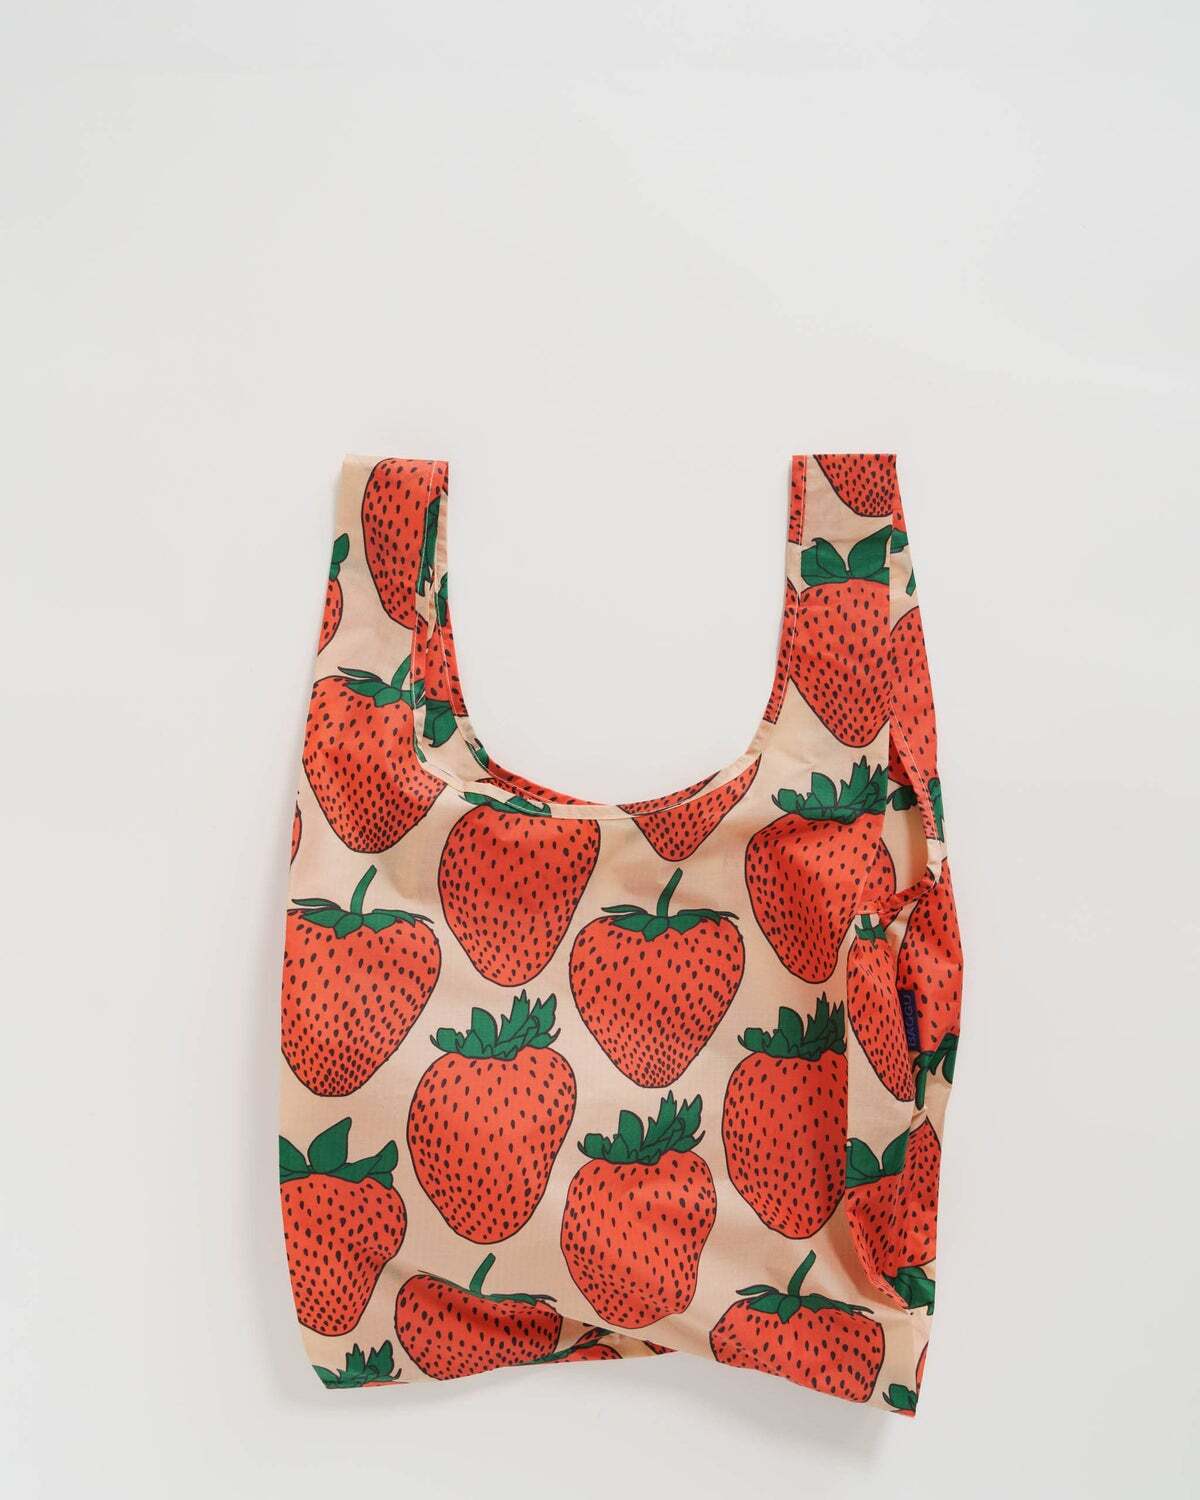 Details about   Baggu Reusable Shopping Bag Tote Standard & Baby BB Print-NEW Discontinued Print 